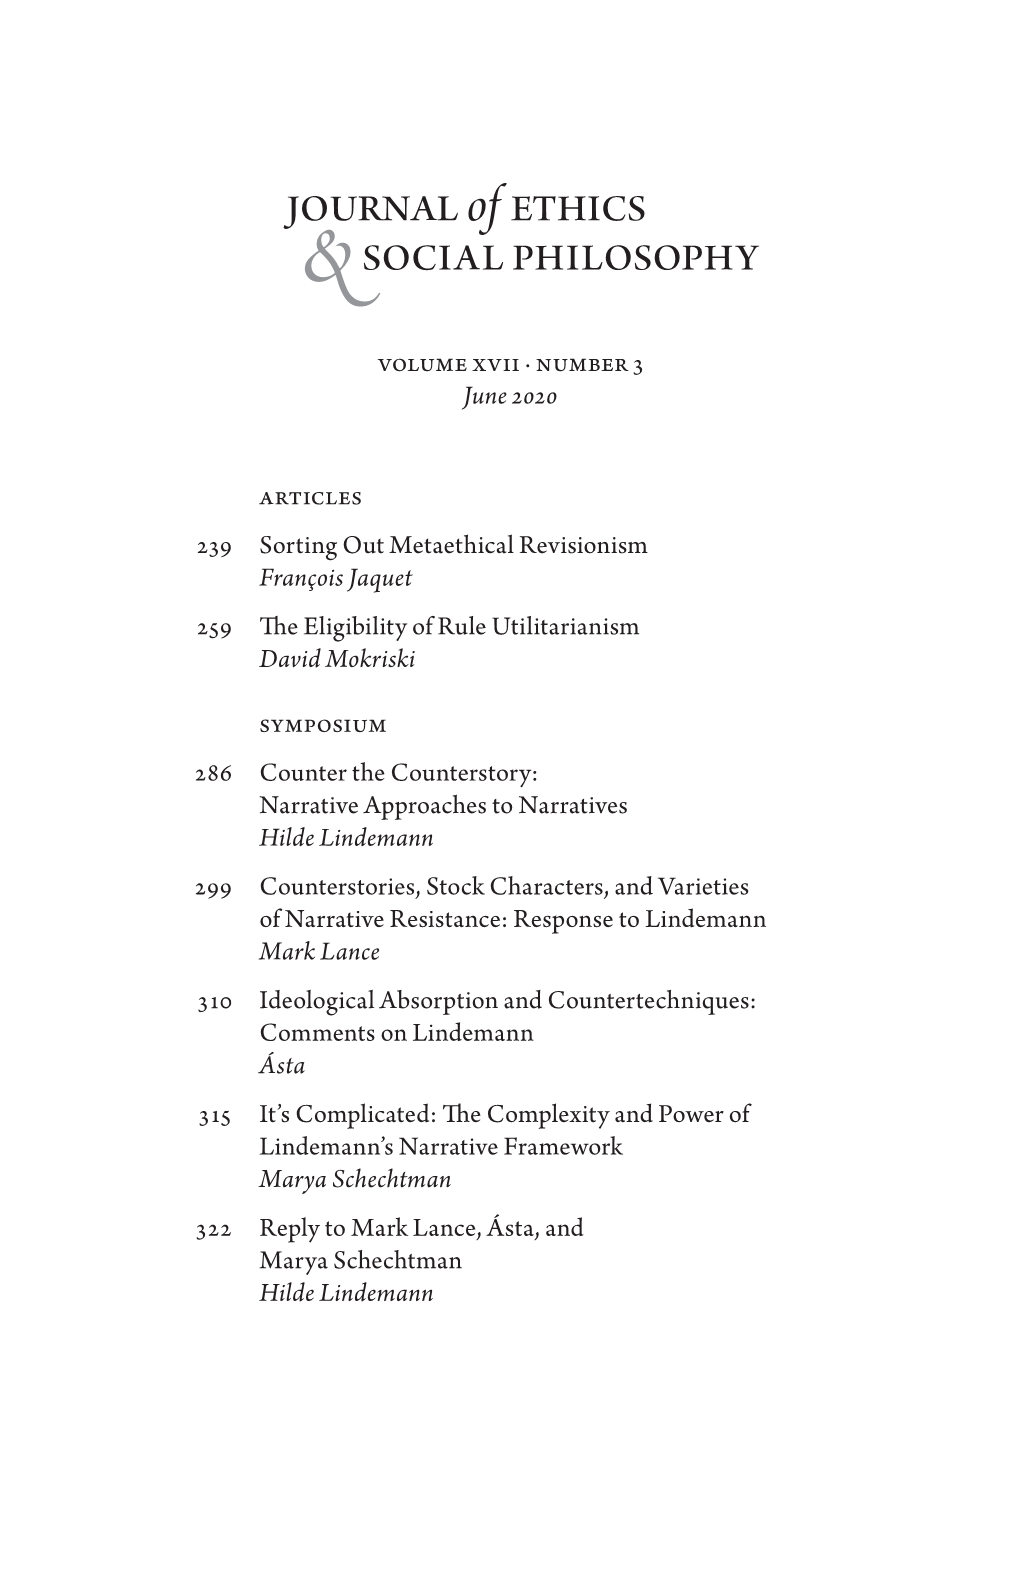 Journal of Ethics and Social Philosophy 17, No. 3 (June 2020): 286–98